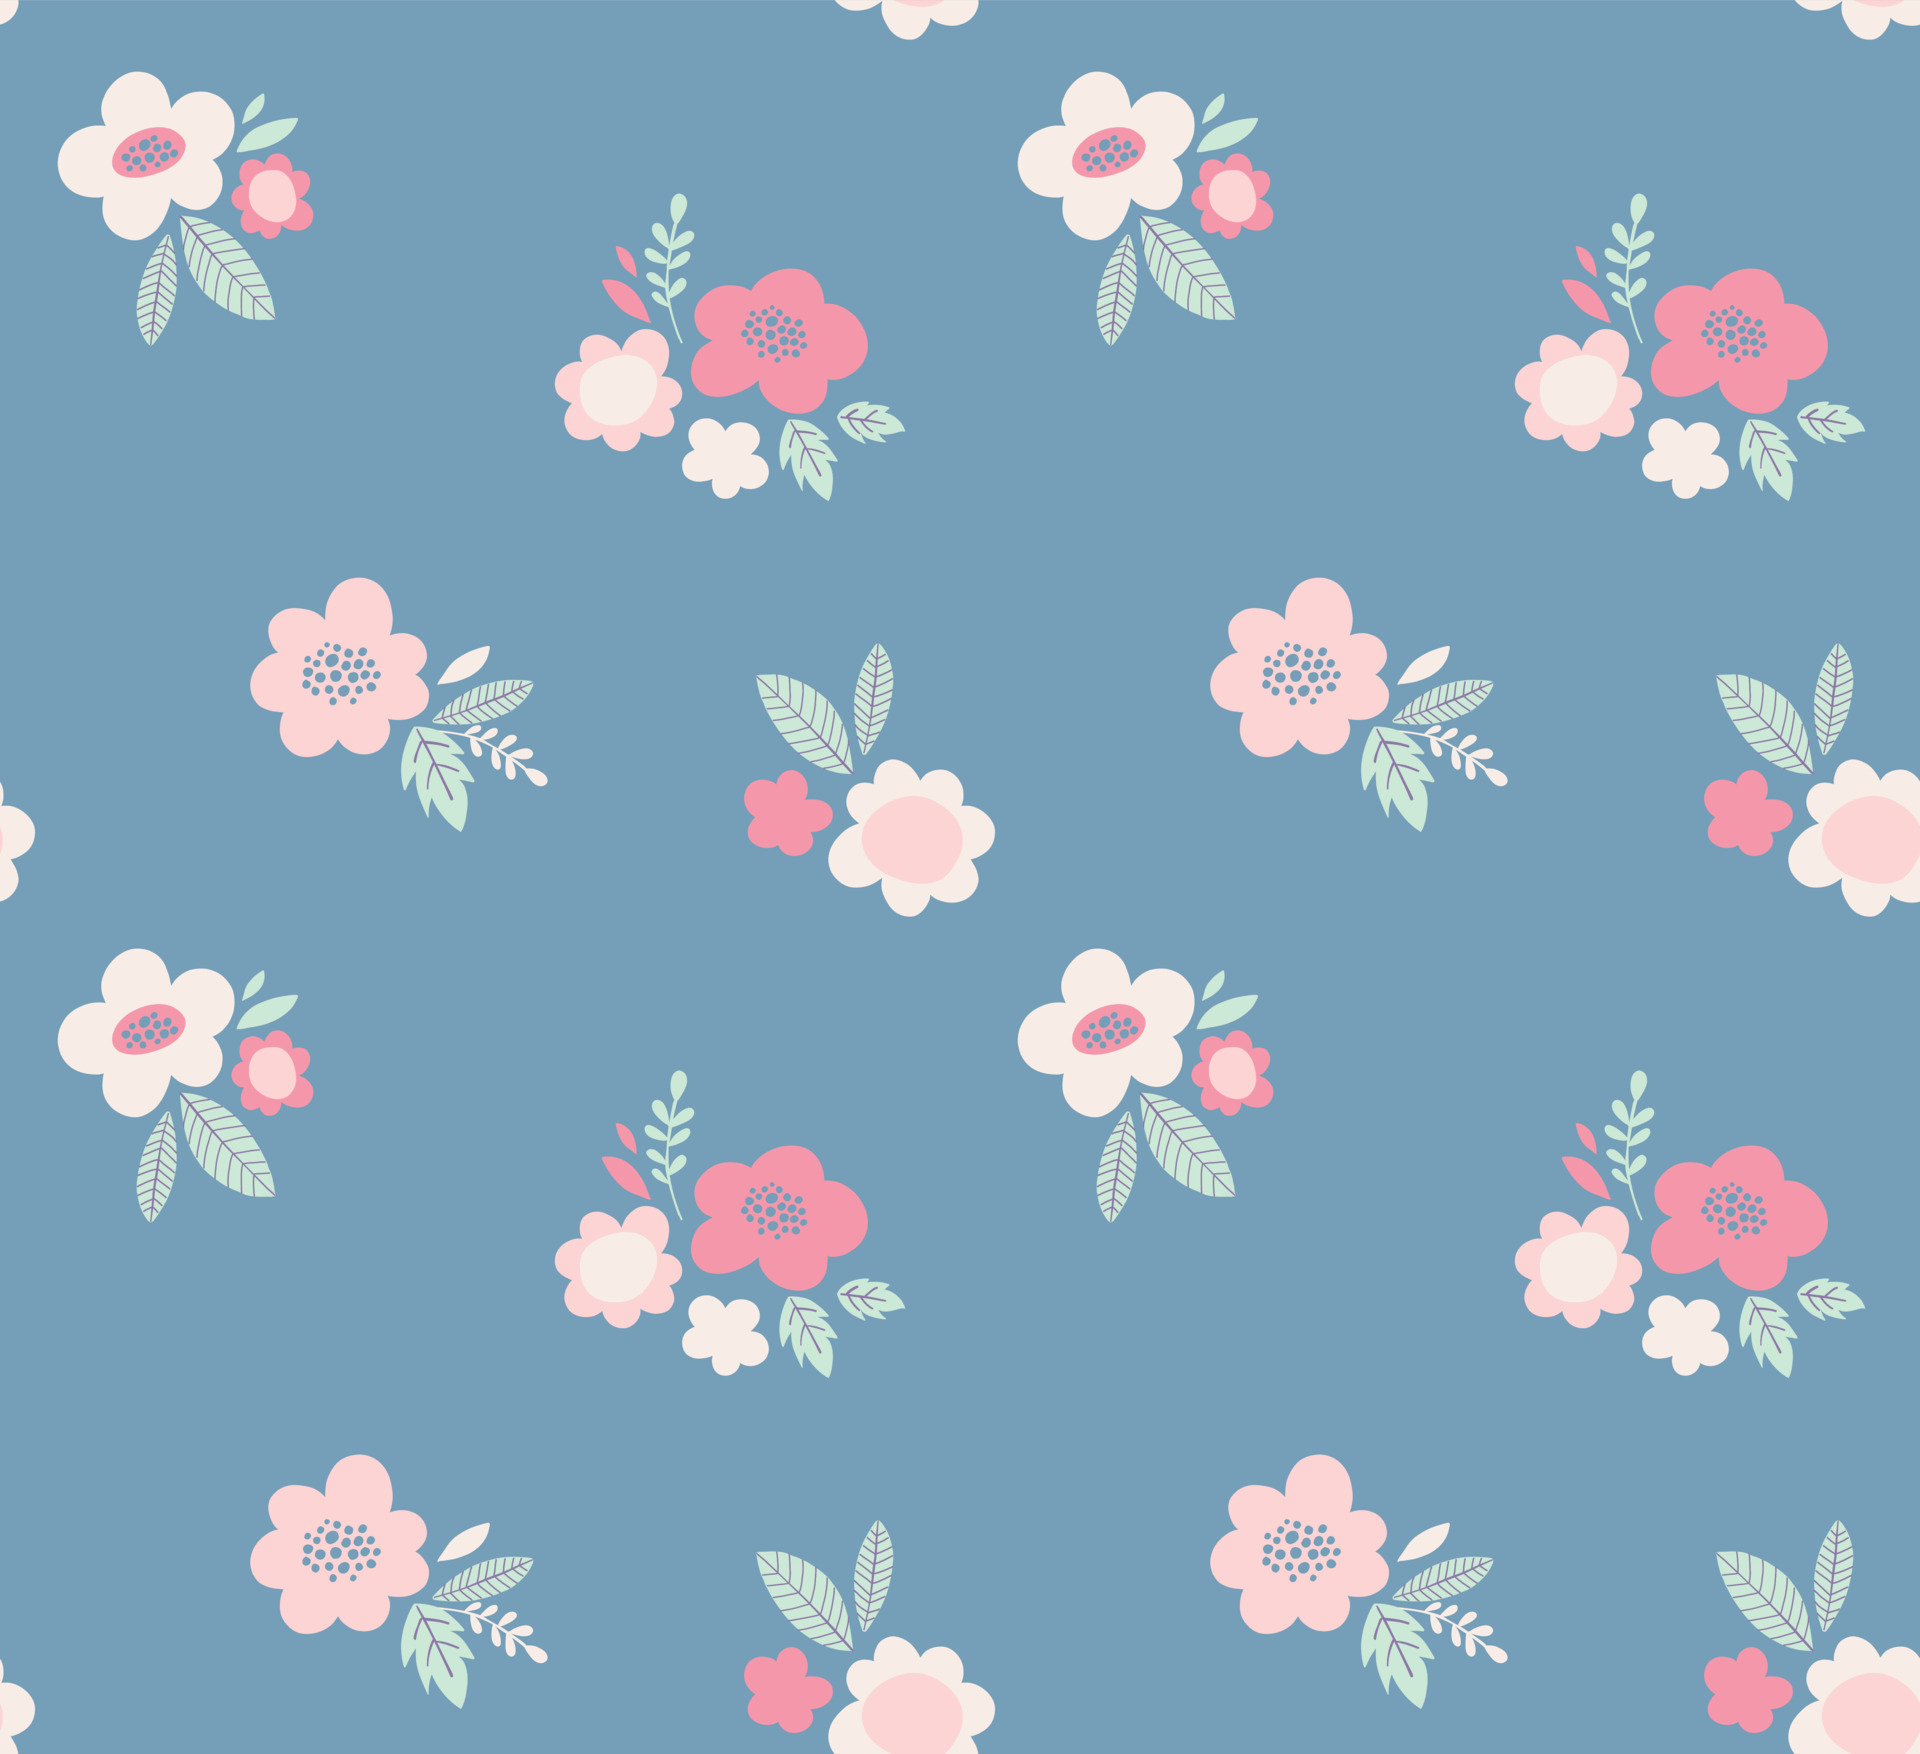 https://static.vecteezy.com/system/resources/previews/006/798/532/original/floral-pattern-ditsy-flower-seamless-background-small-flowers-on-dark-navy-background-vector.jpg